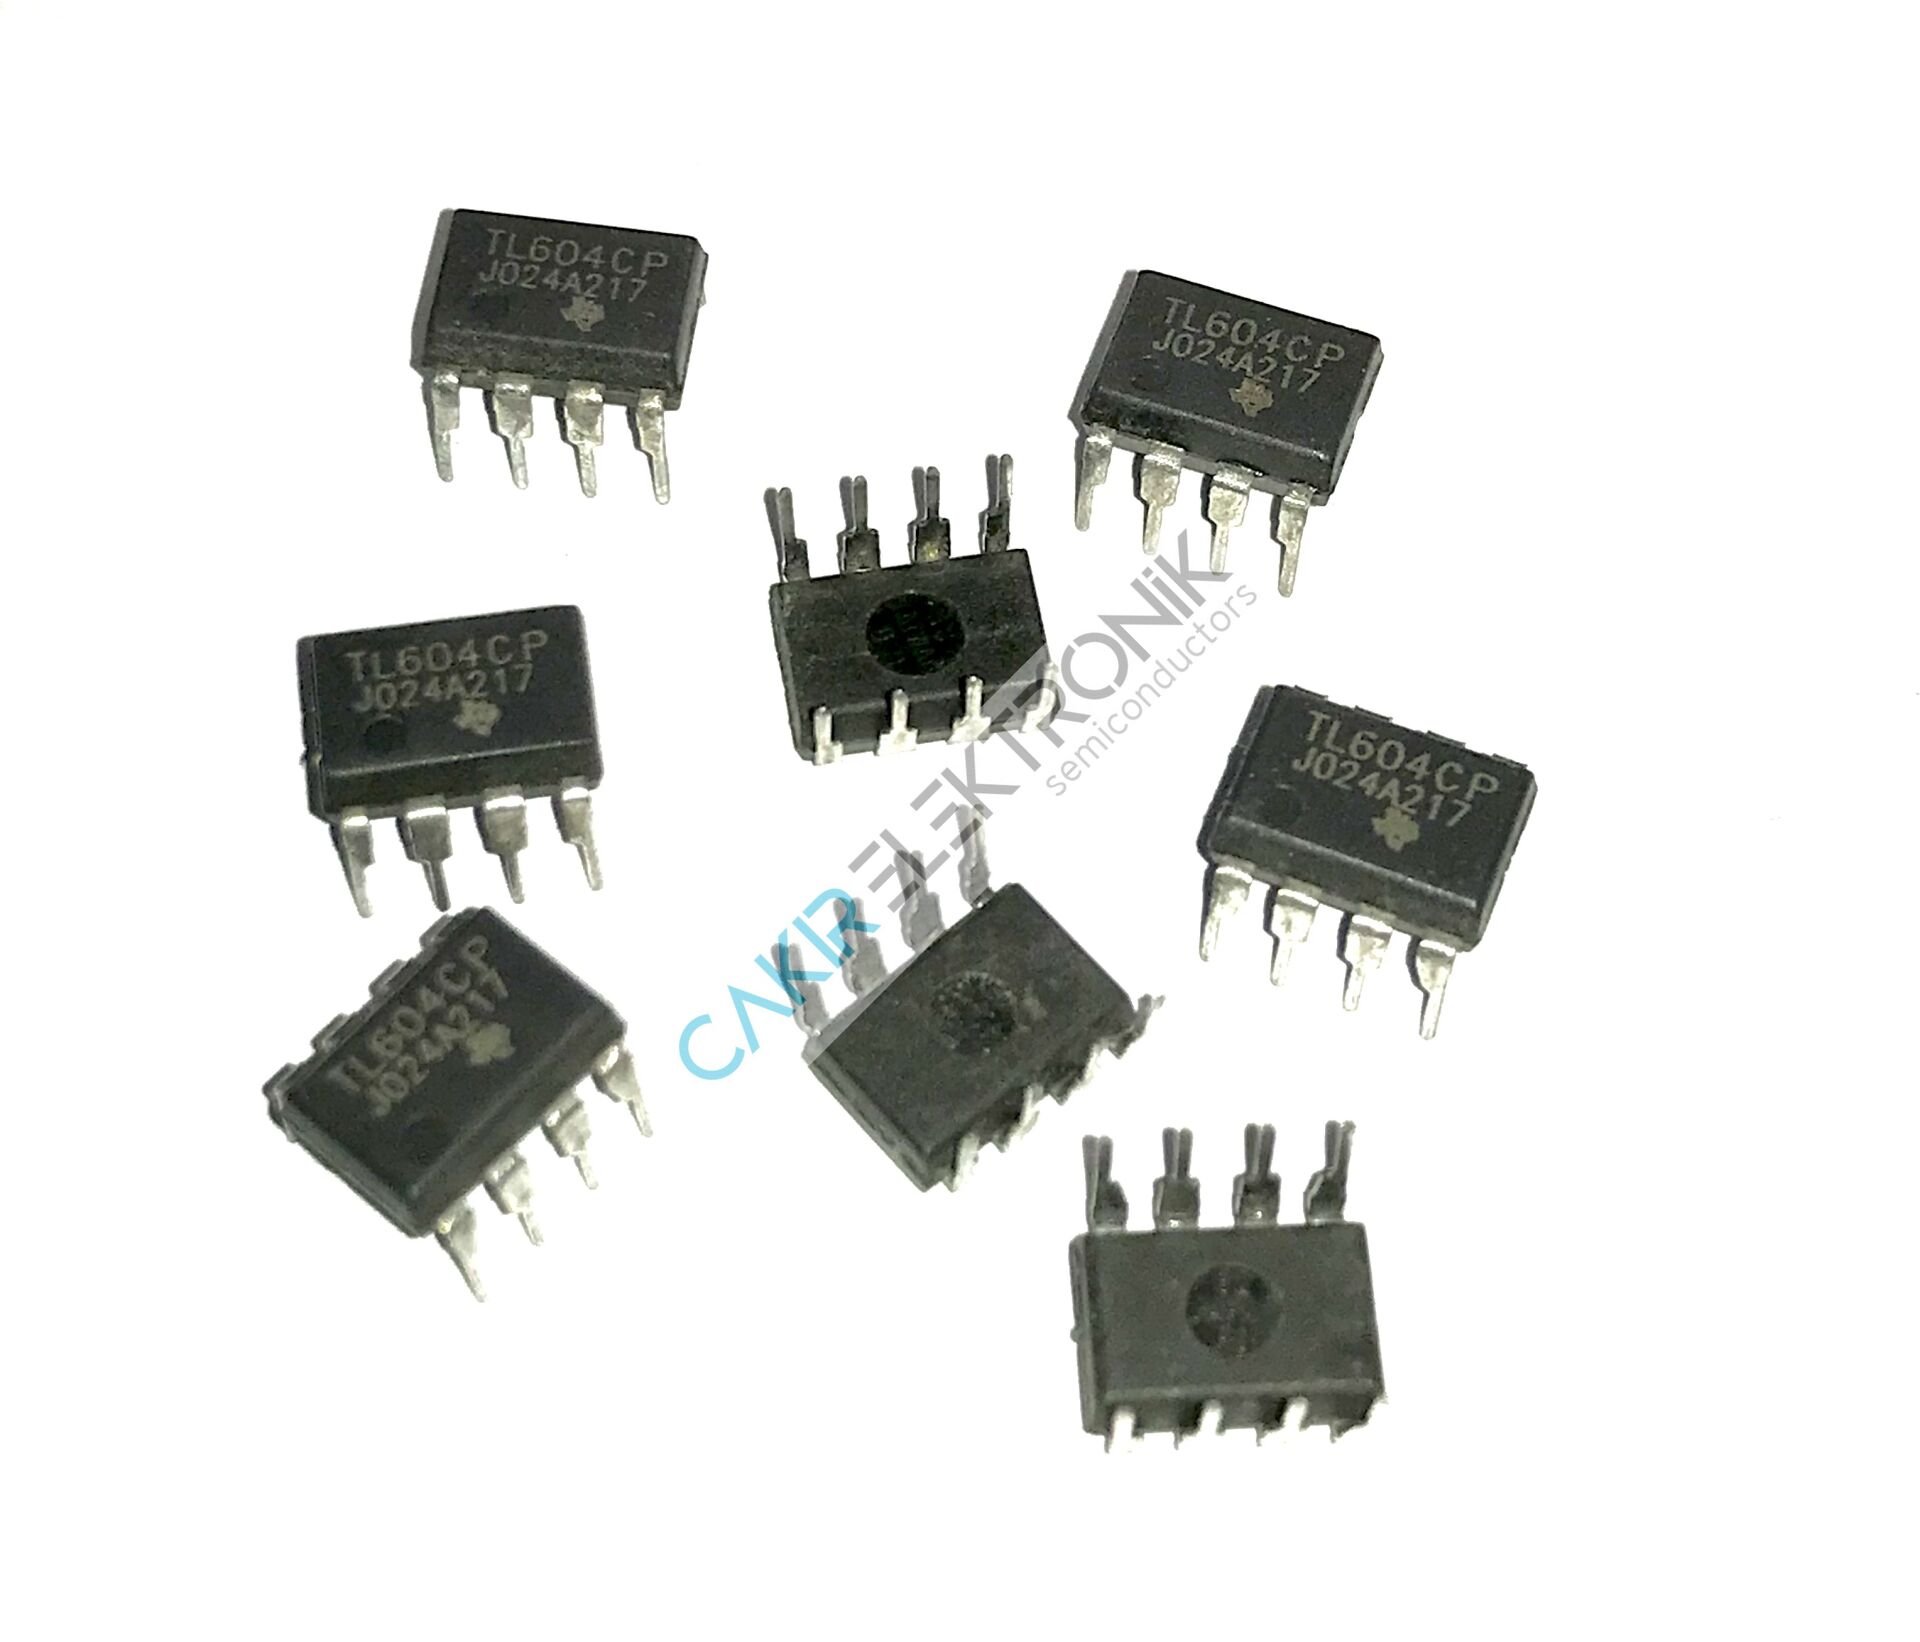 TL604CP - TL604 -  P-MOS ANALOG SWITCHES